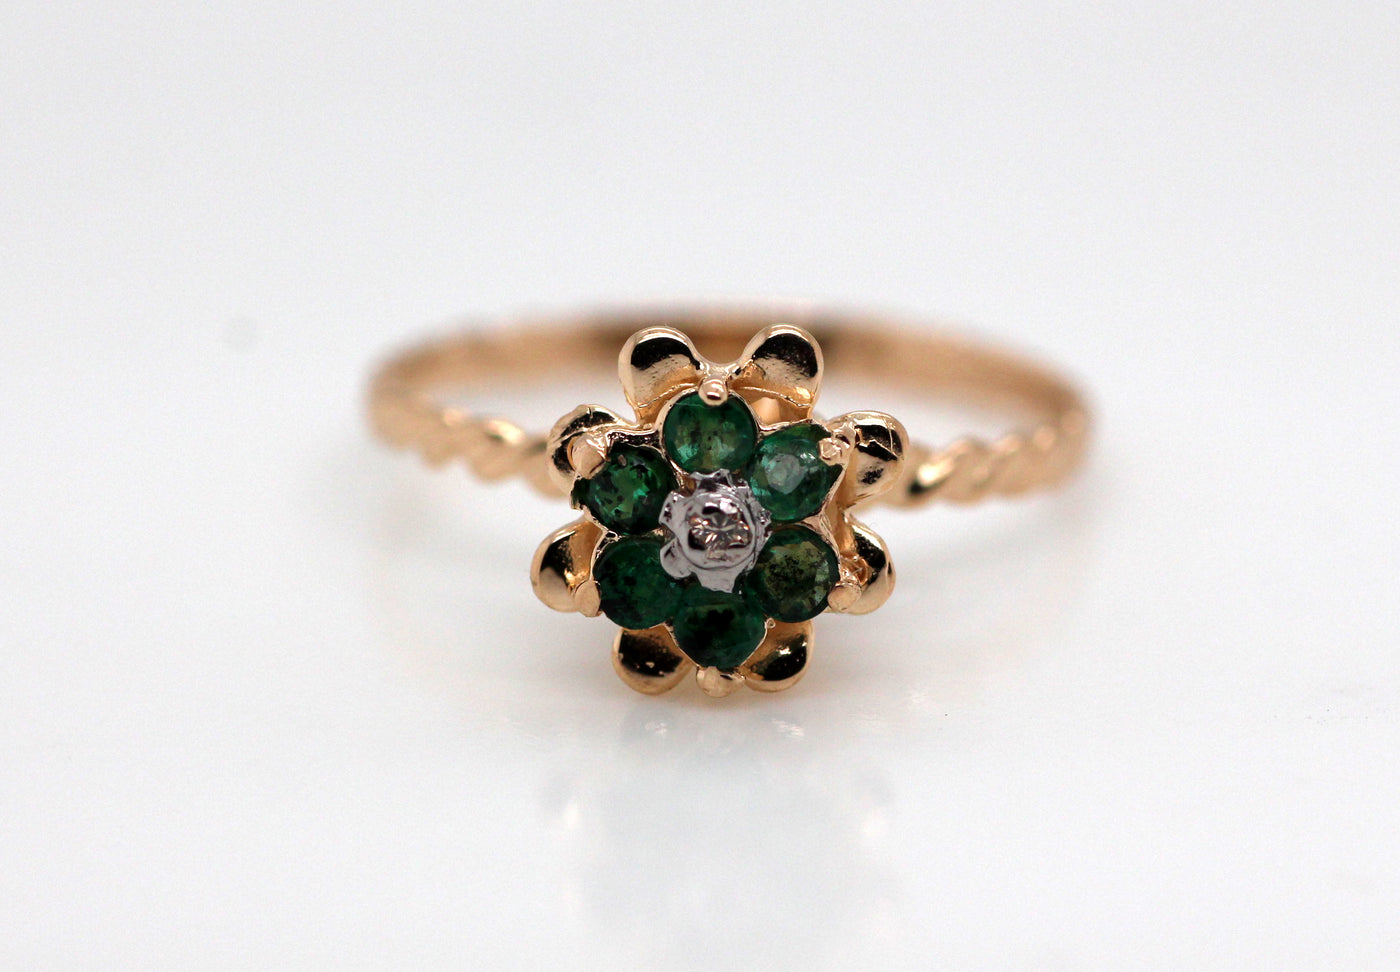 ESTATE 14KY .13 CTTW EMERALD AND DIAMOND TULIP RING .01 CTTW